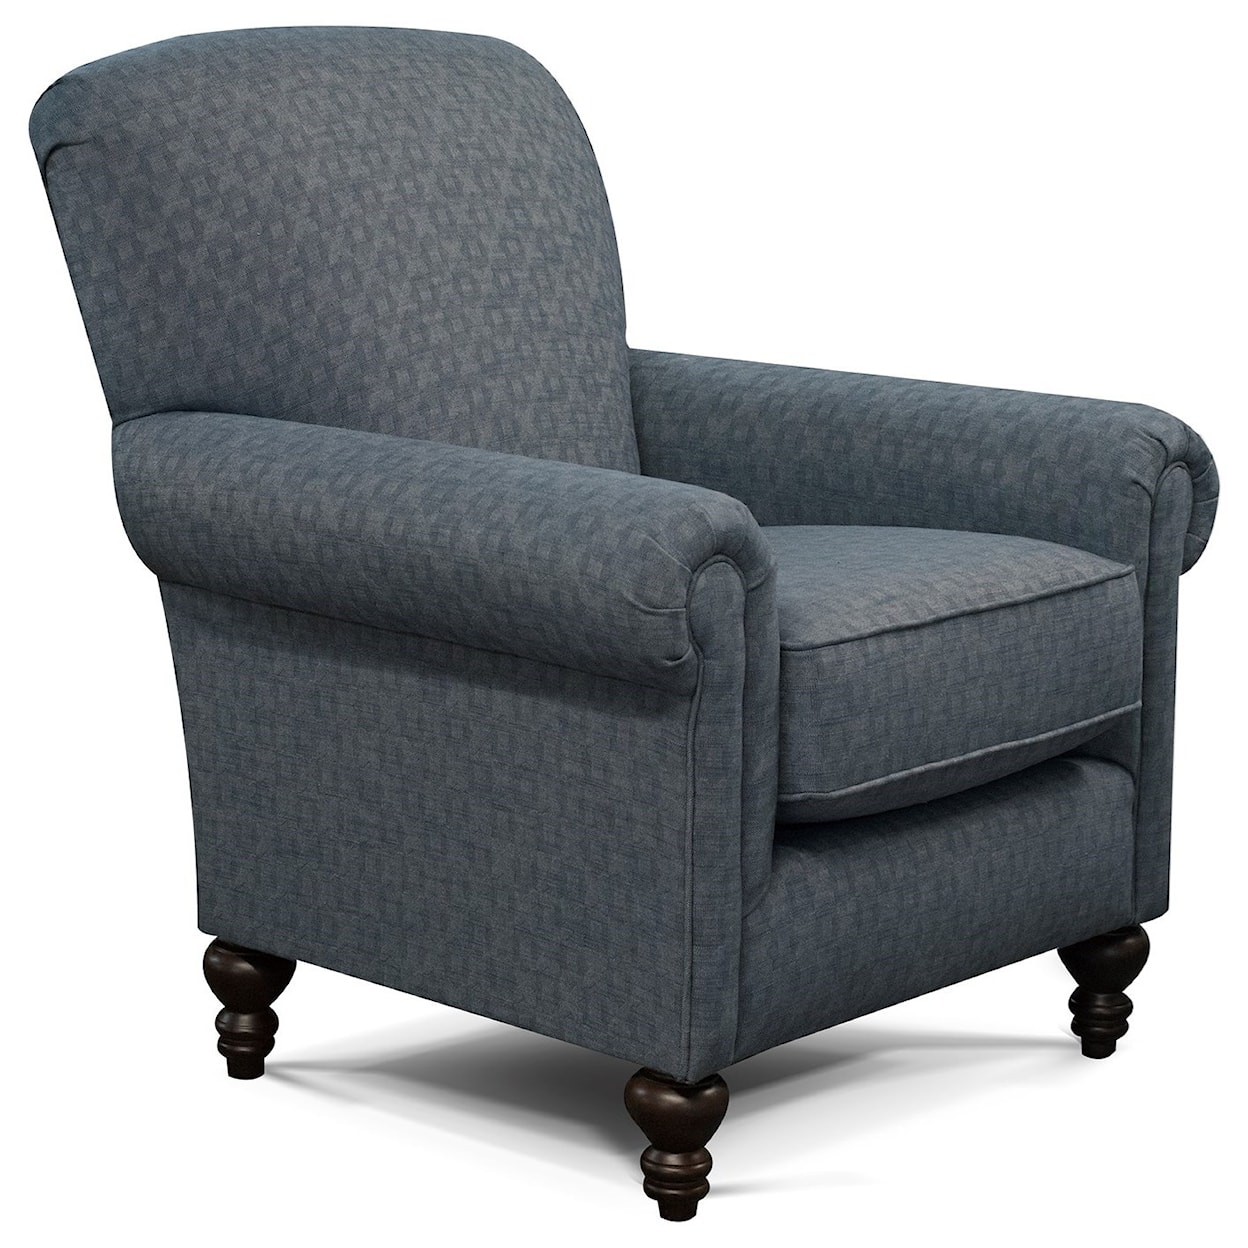 England 630 Series Upholstered Chair